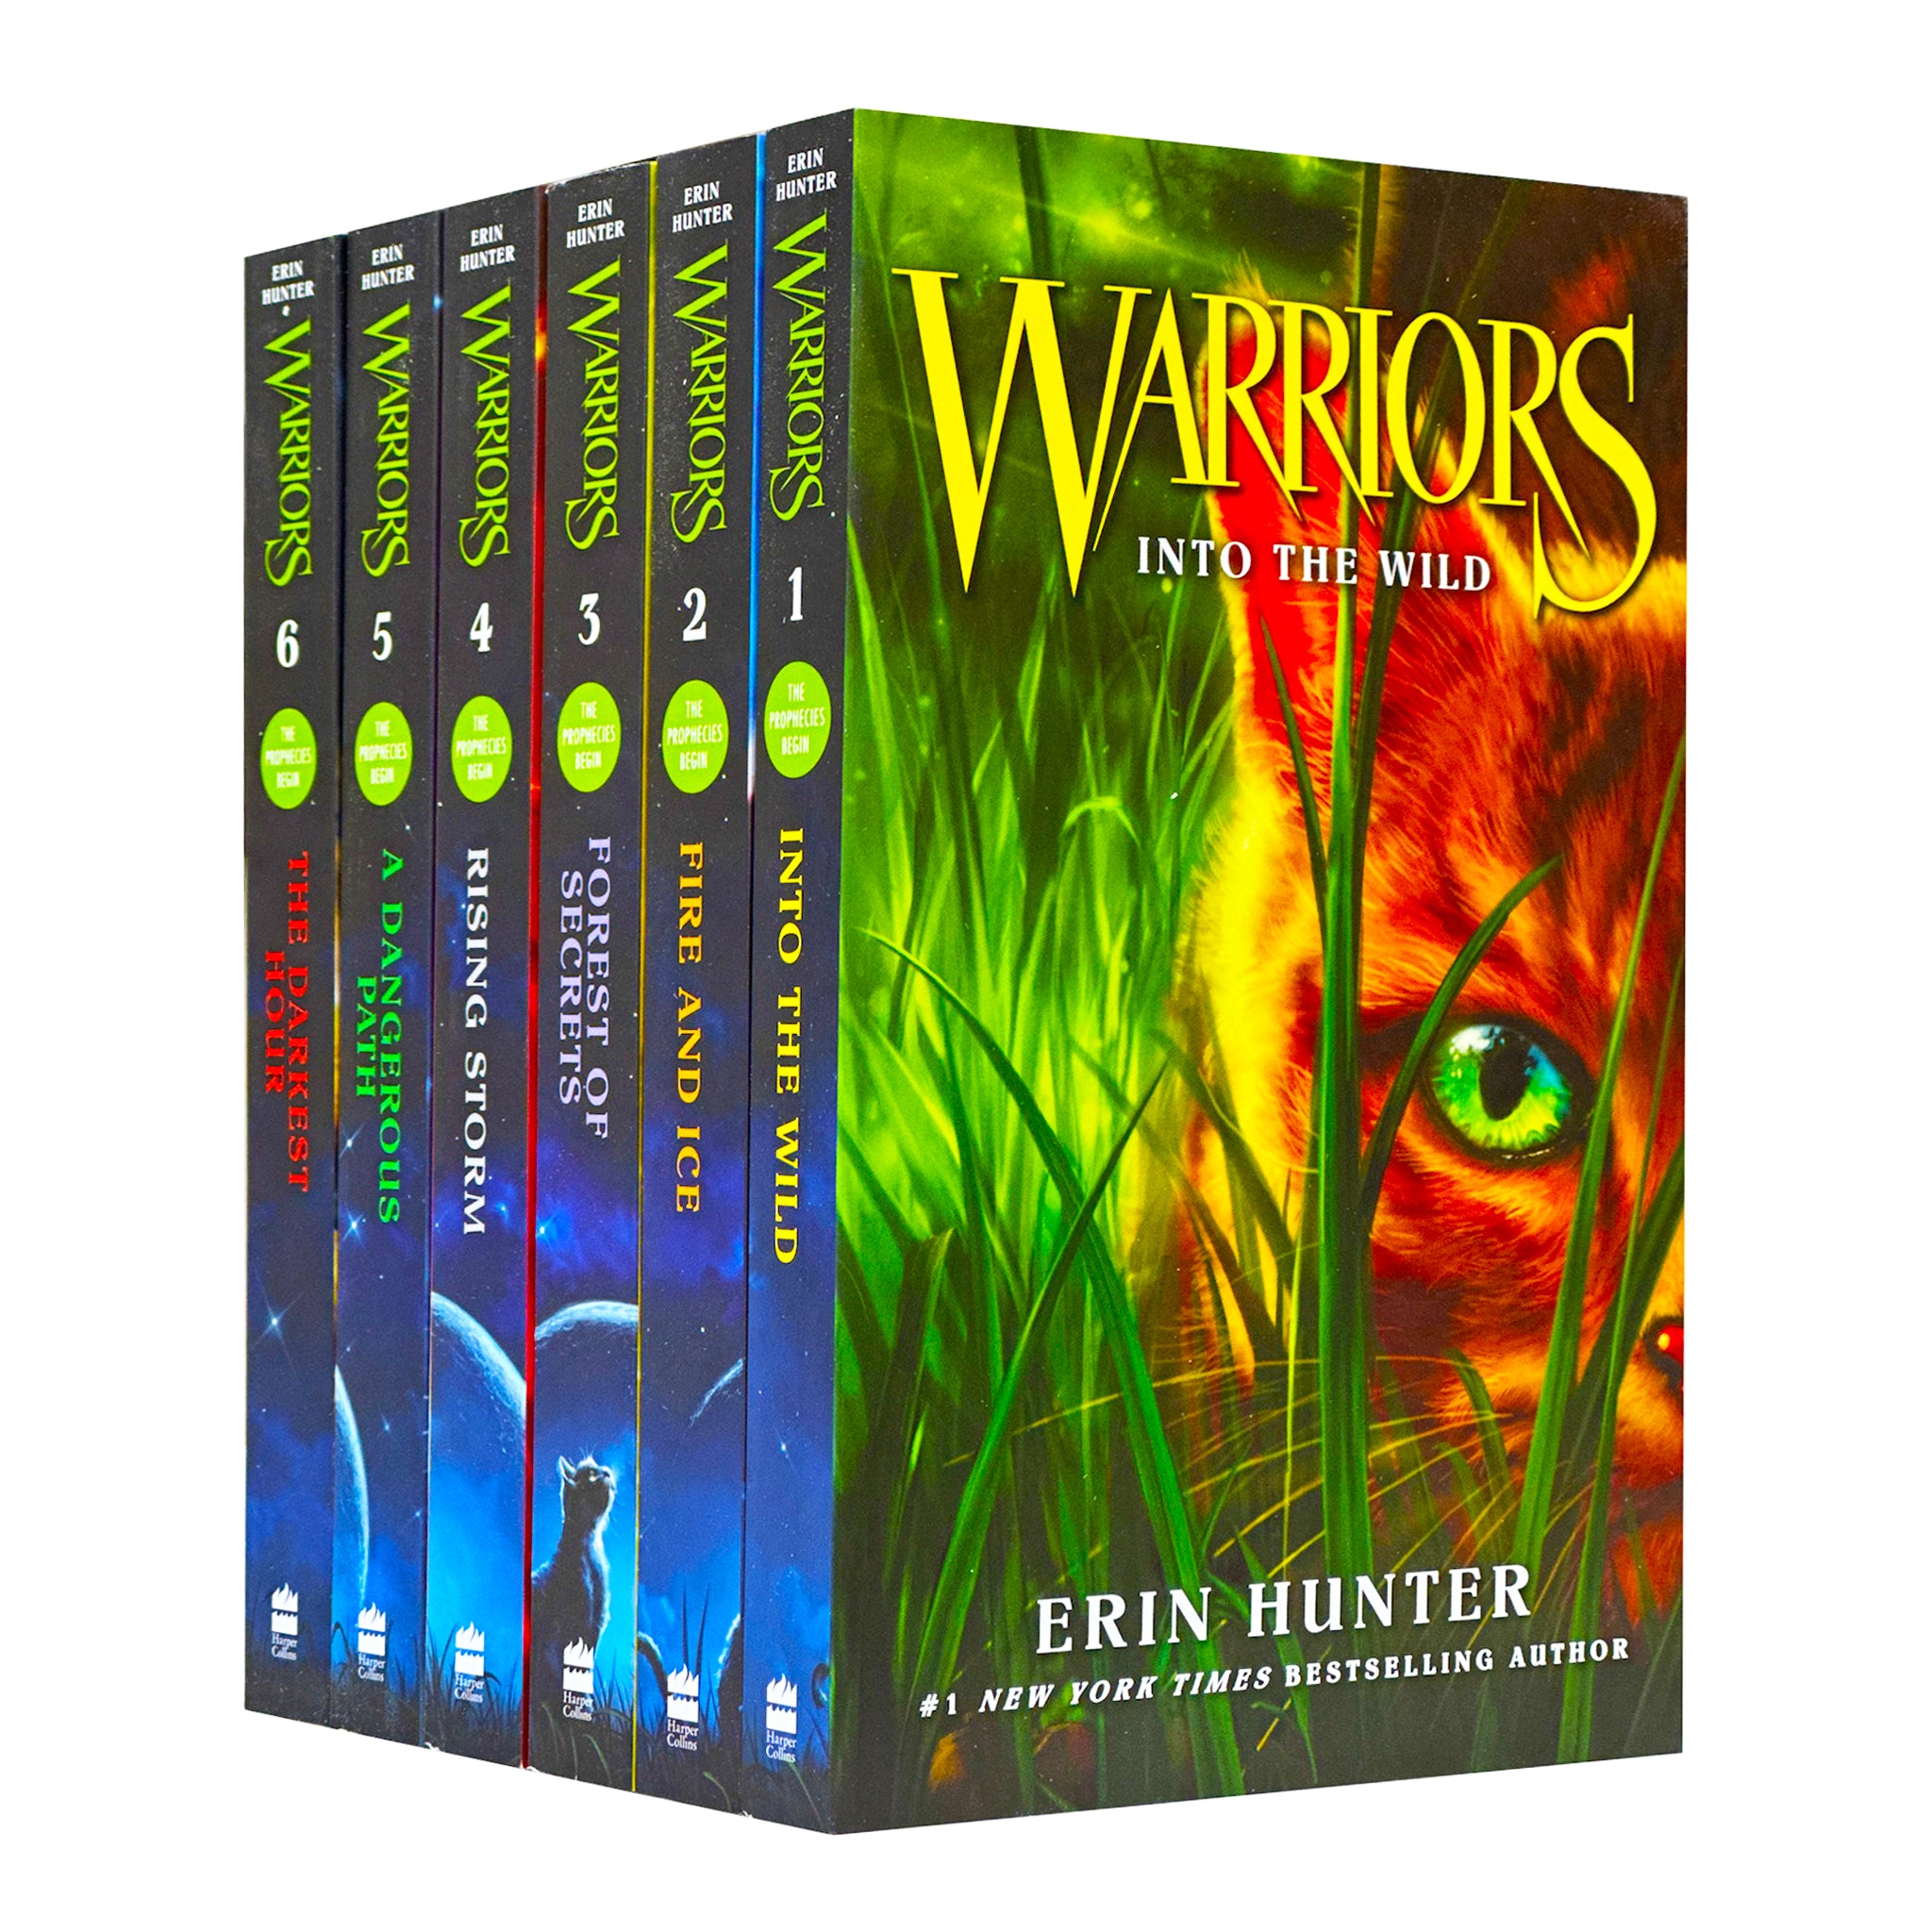 Warrior Cats Series 2 The New Prophecy by Erin Hunter 6 Books Set